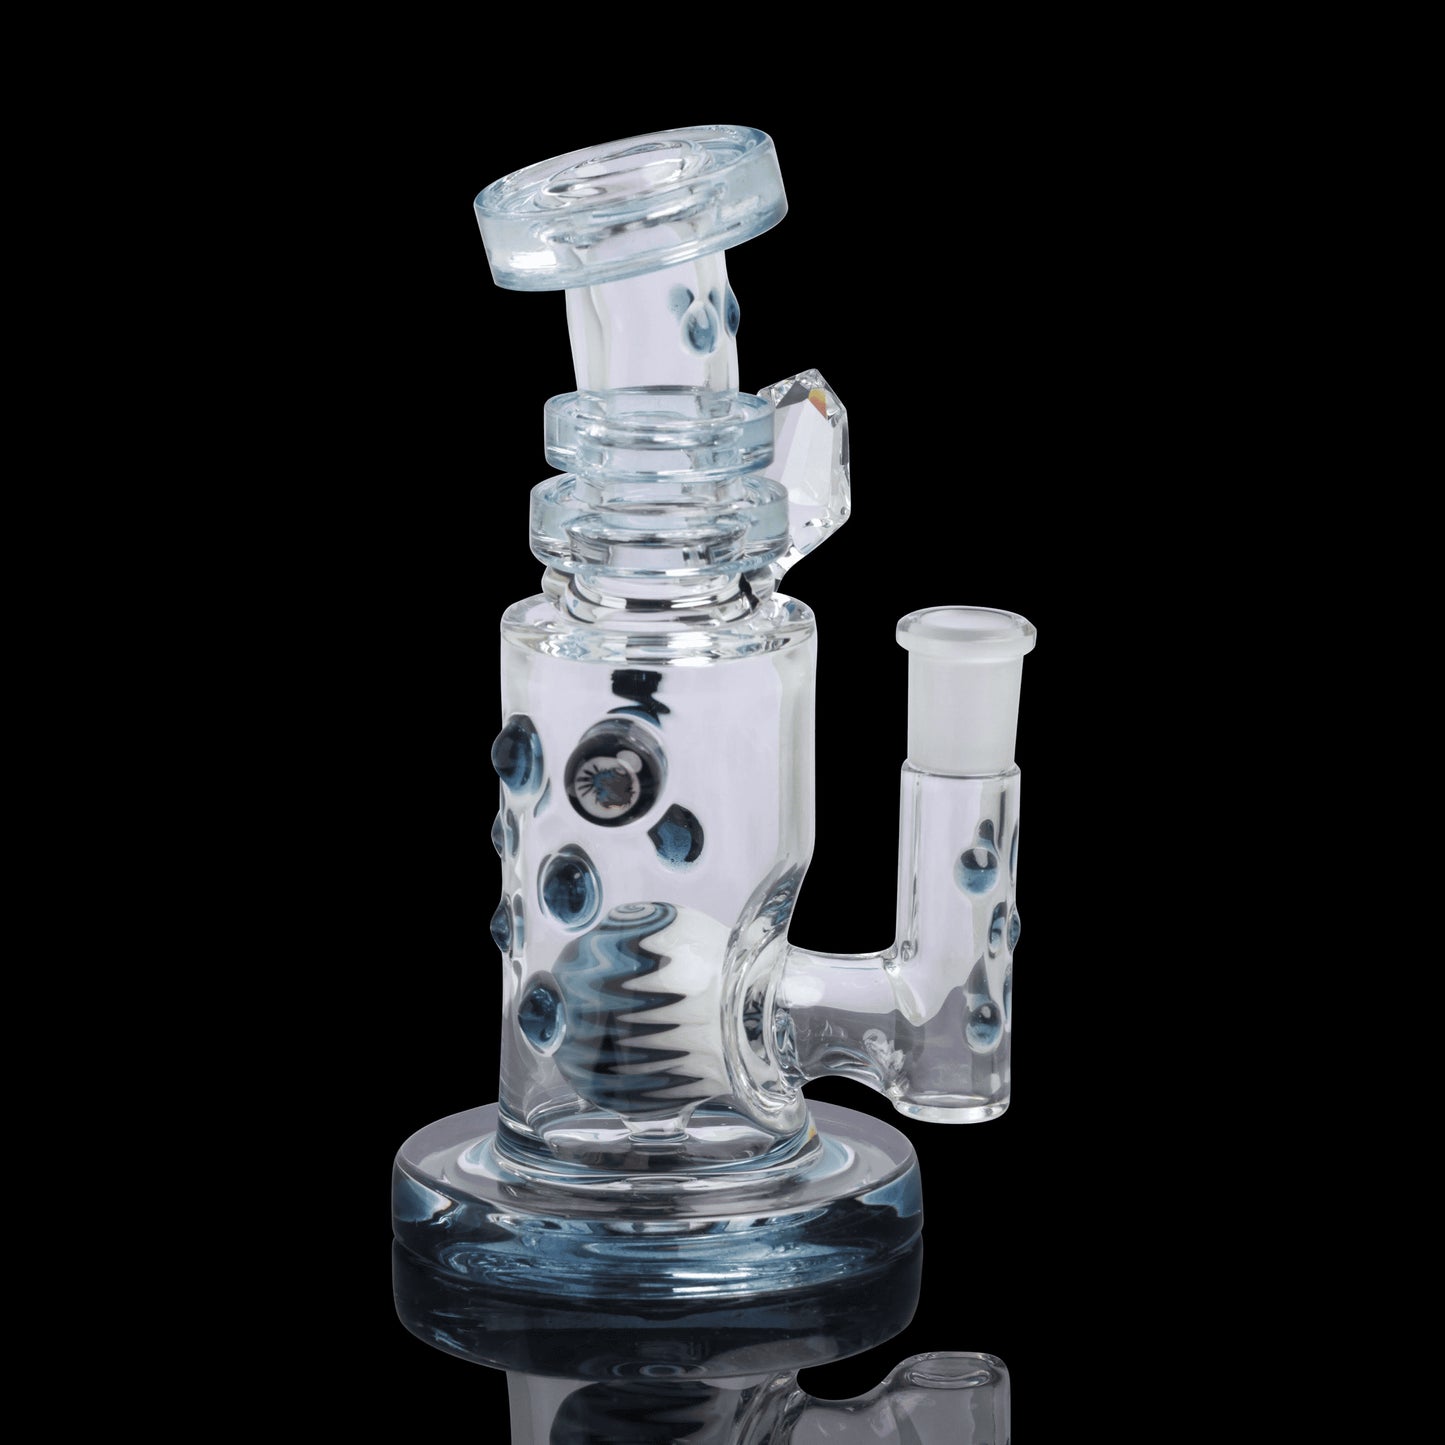 hand-blown design of the Rainbow Rig (E) by Chris Hubbard